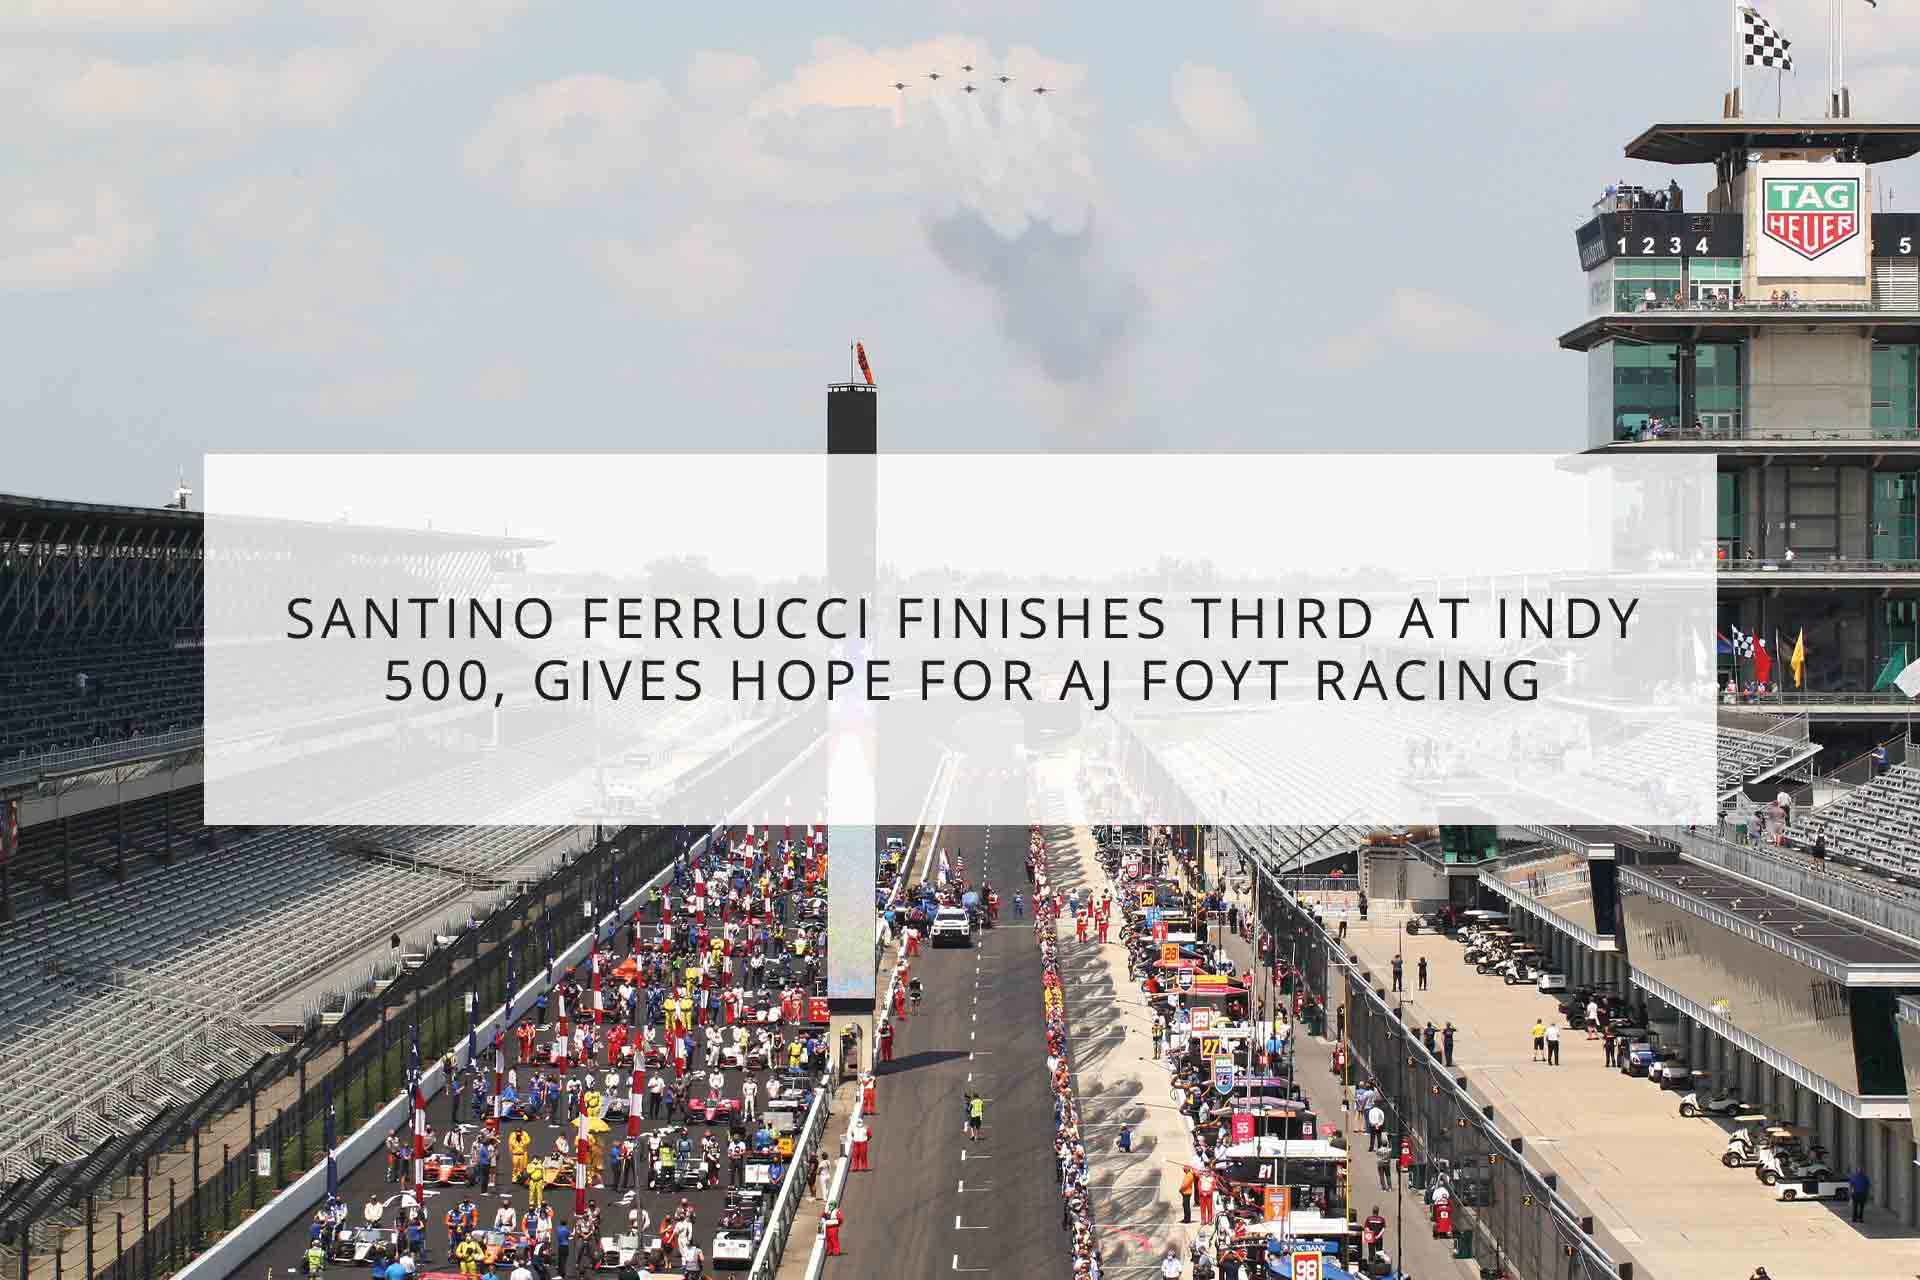 Santino Ferrucci finishes third at Indy 500, gives hope for AJ Foyt Racing